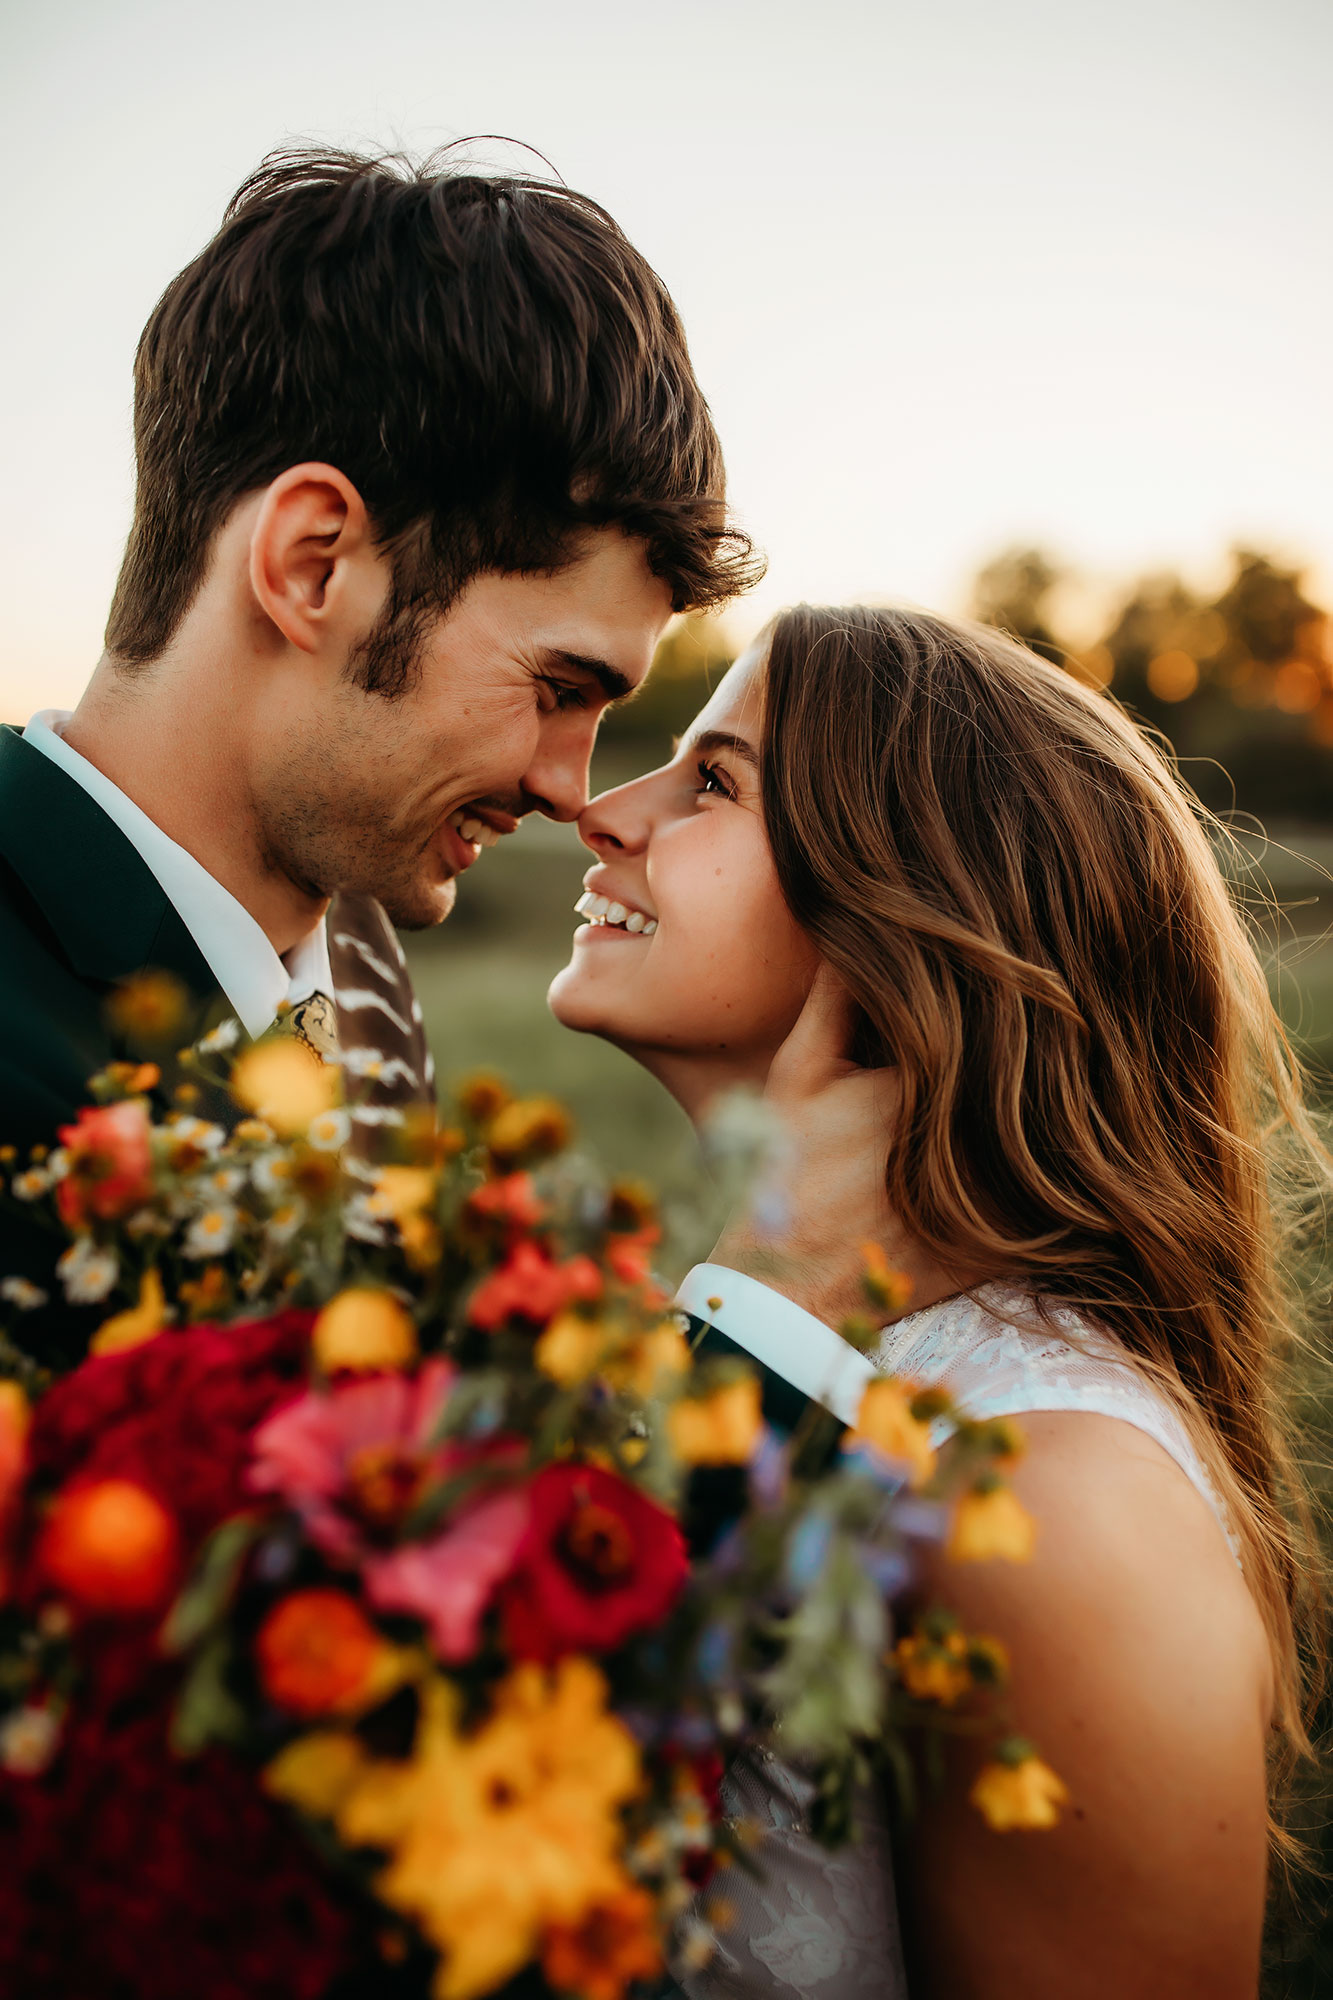 Happy couple on wedding day with colorful flowers